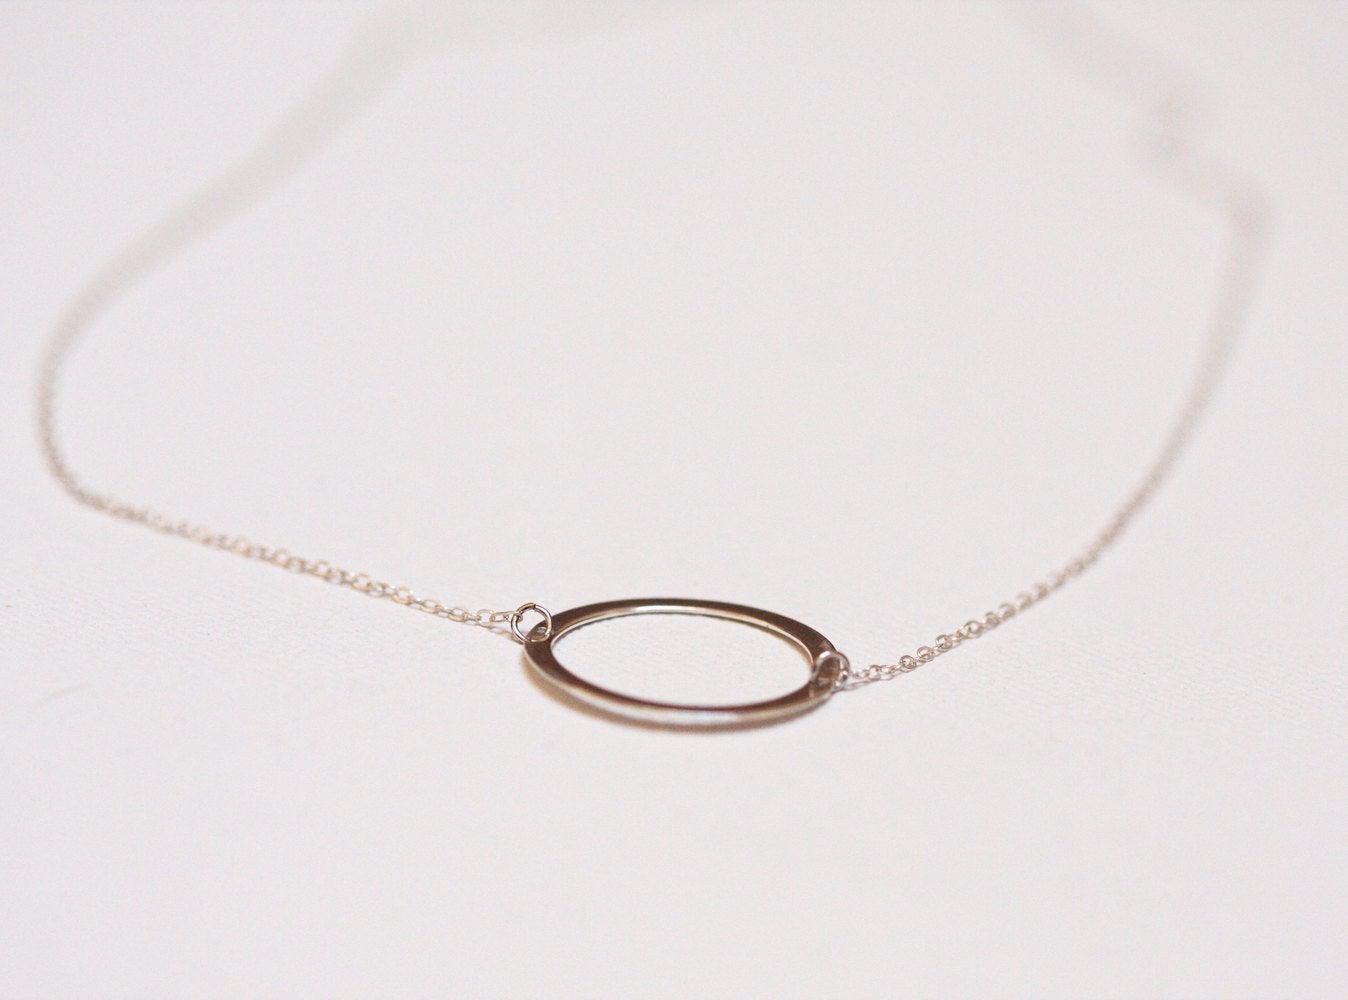 Silver hollow circle karma chain necklace